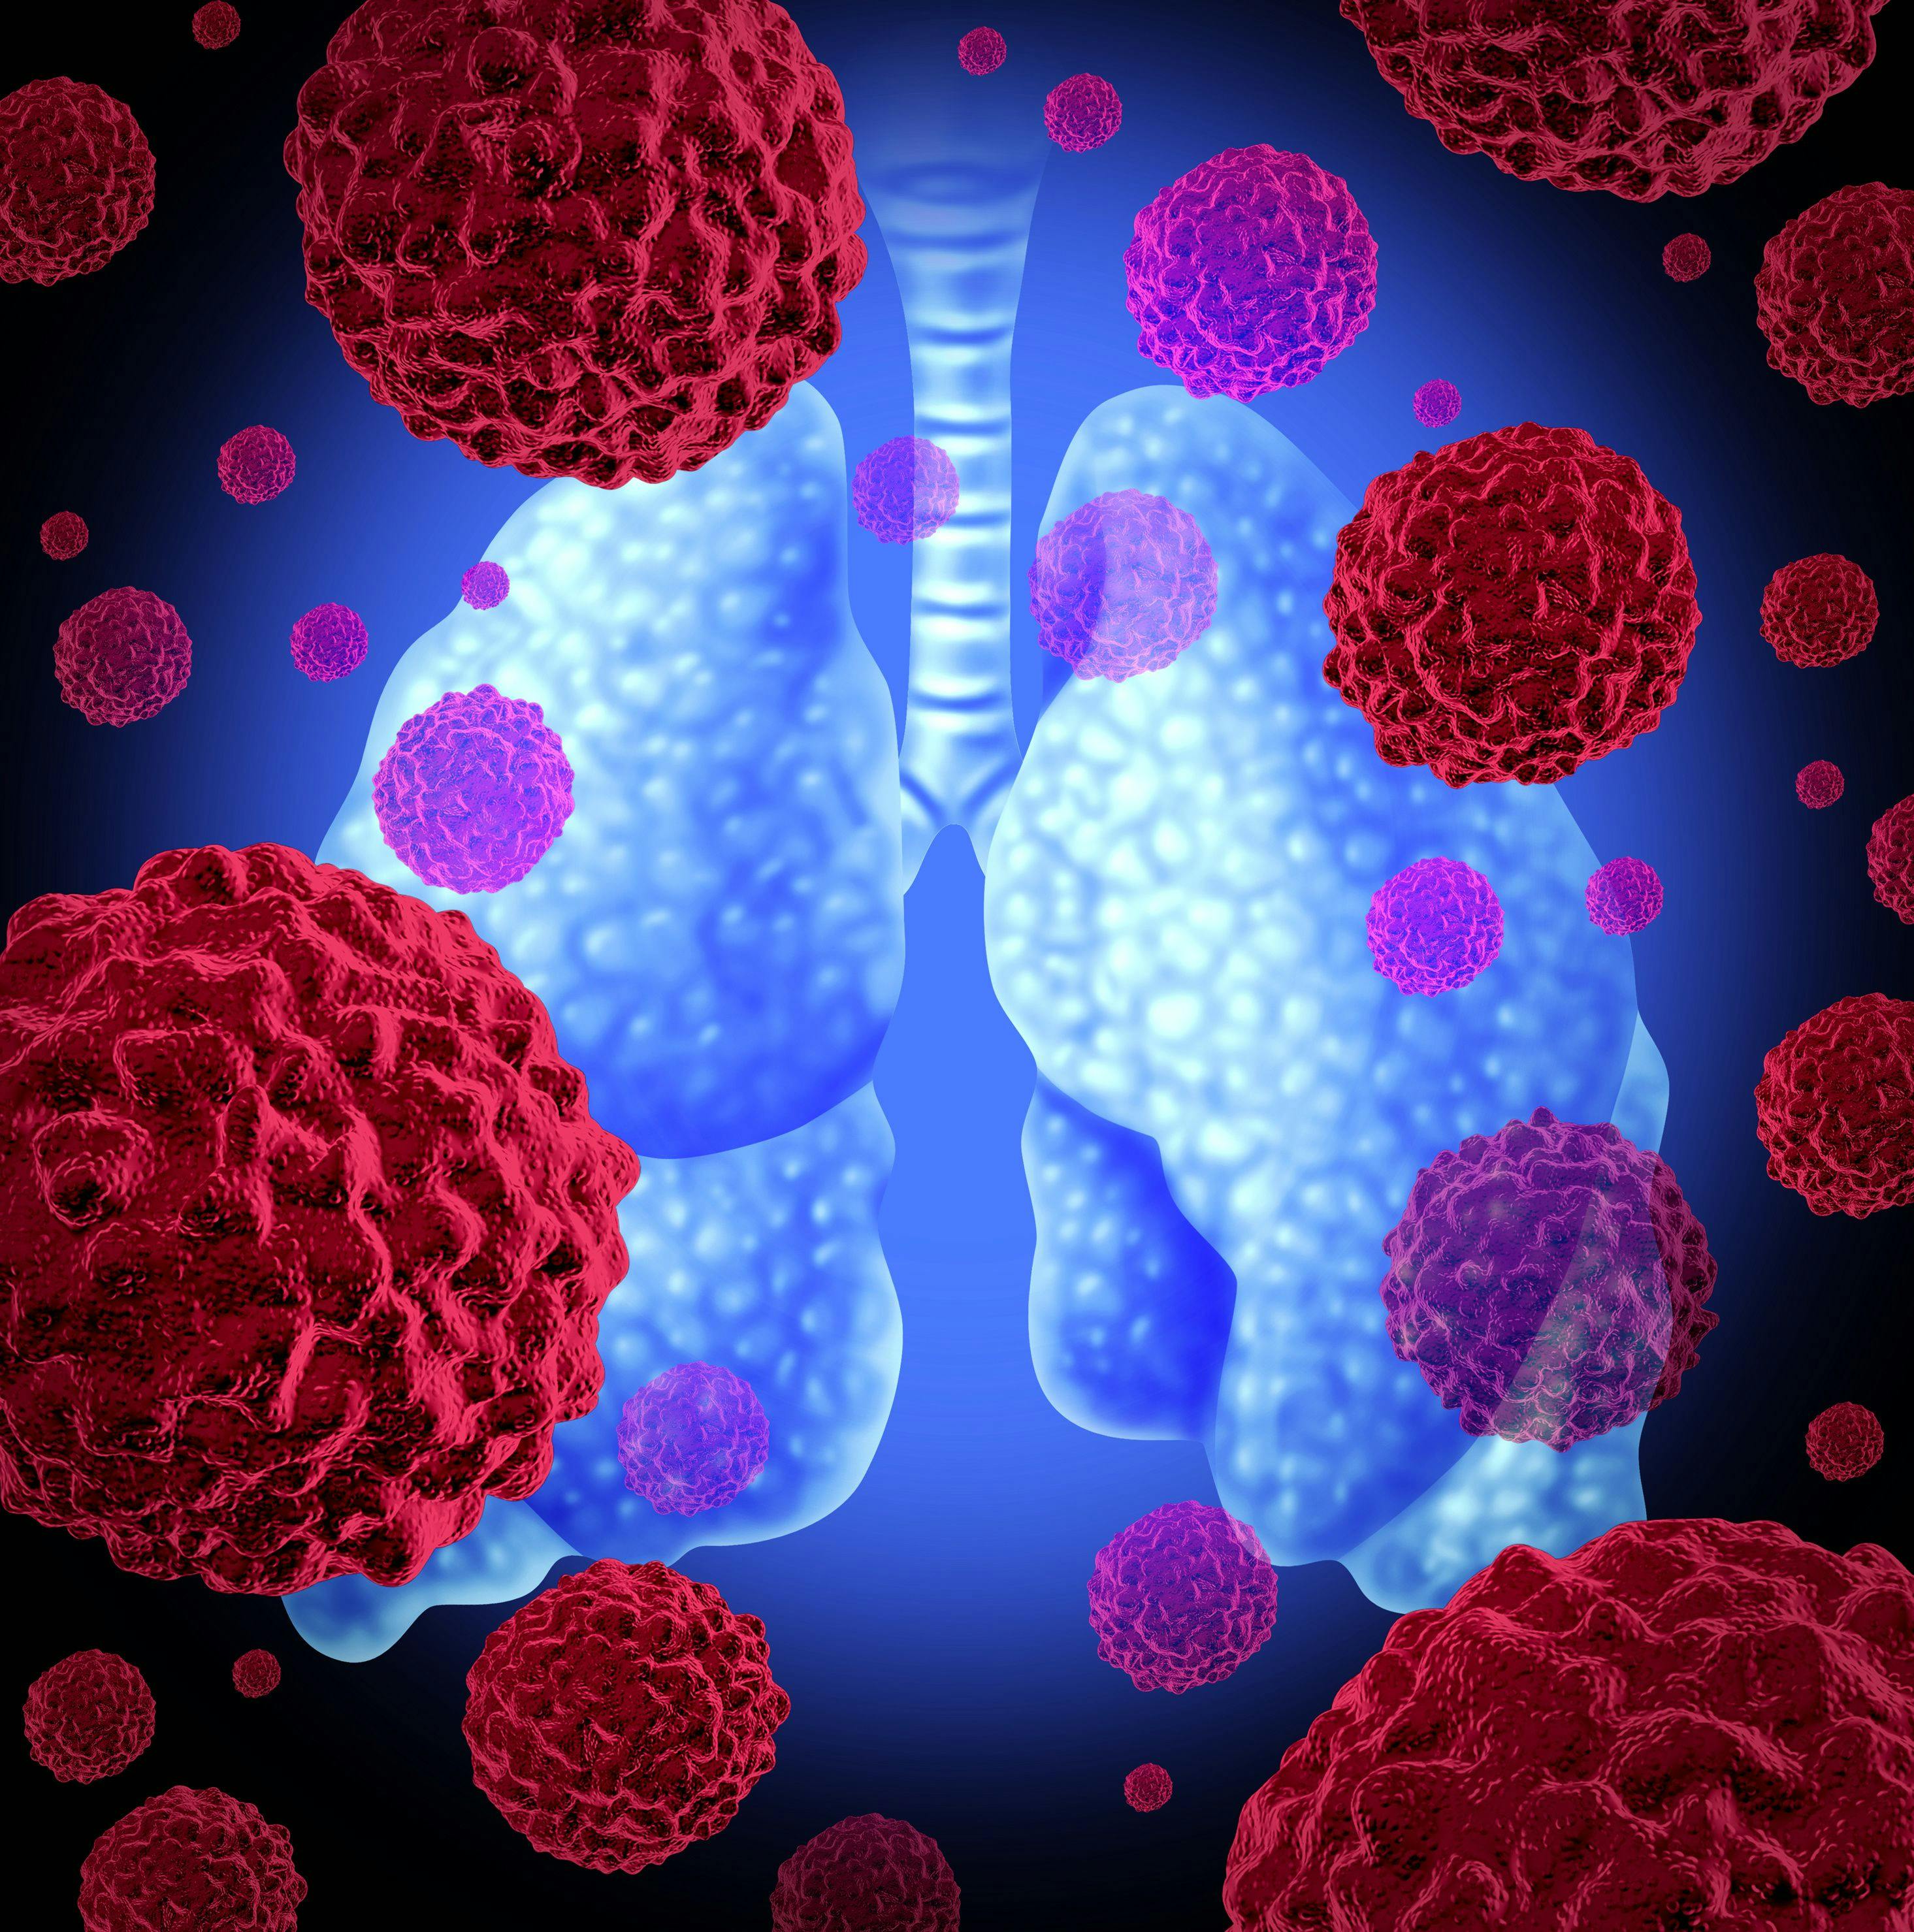 Although clinical trial enrollment declined among patients with lung cancer from 2019 to 2020 during the COVID-19 pandemic, mitigation strategies helped to improve enrollment.